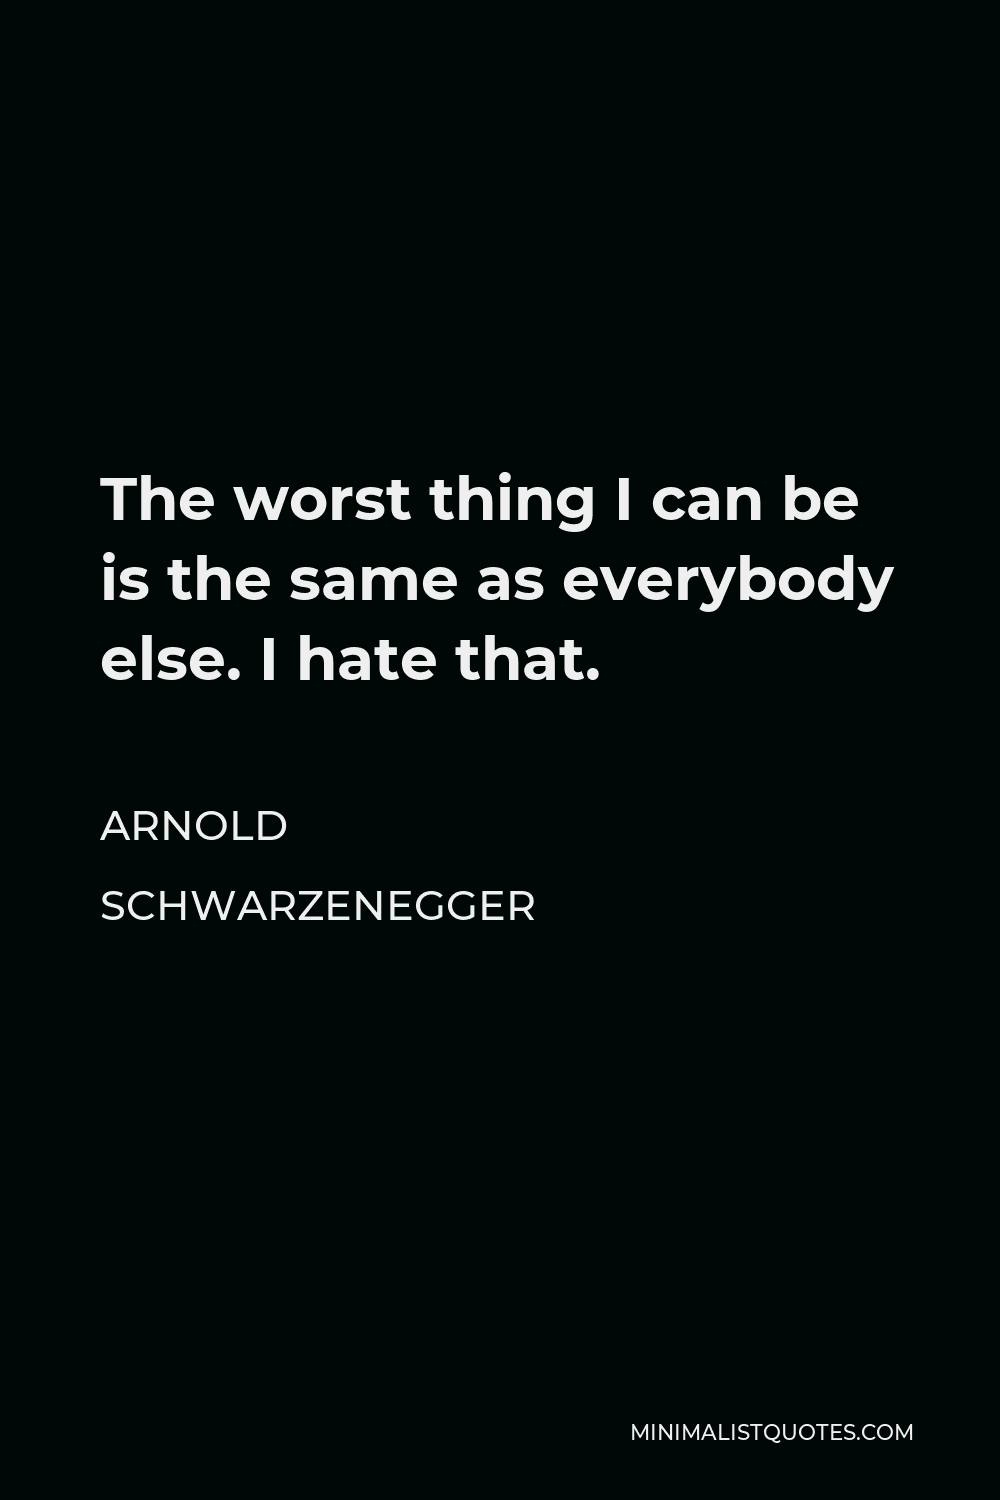 Arnold Schwarzenegger Quote - The worst thing I can be is the same as everybody else. I hate that.